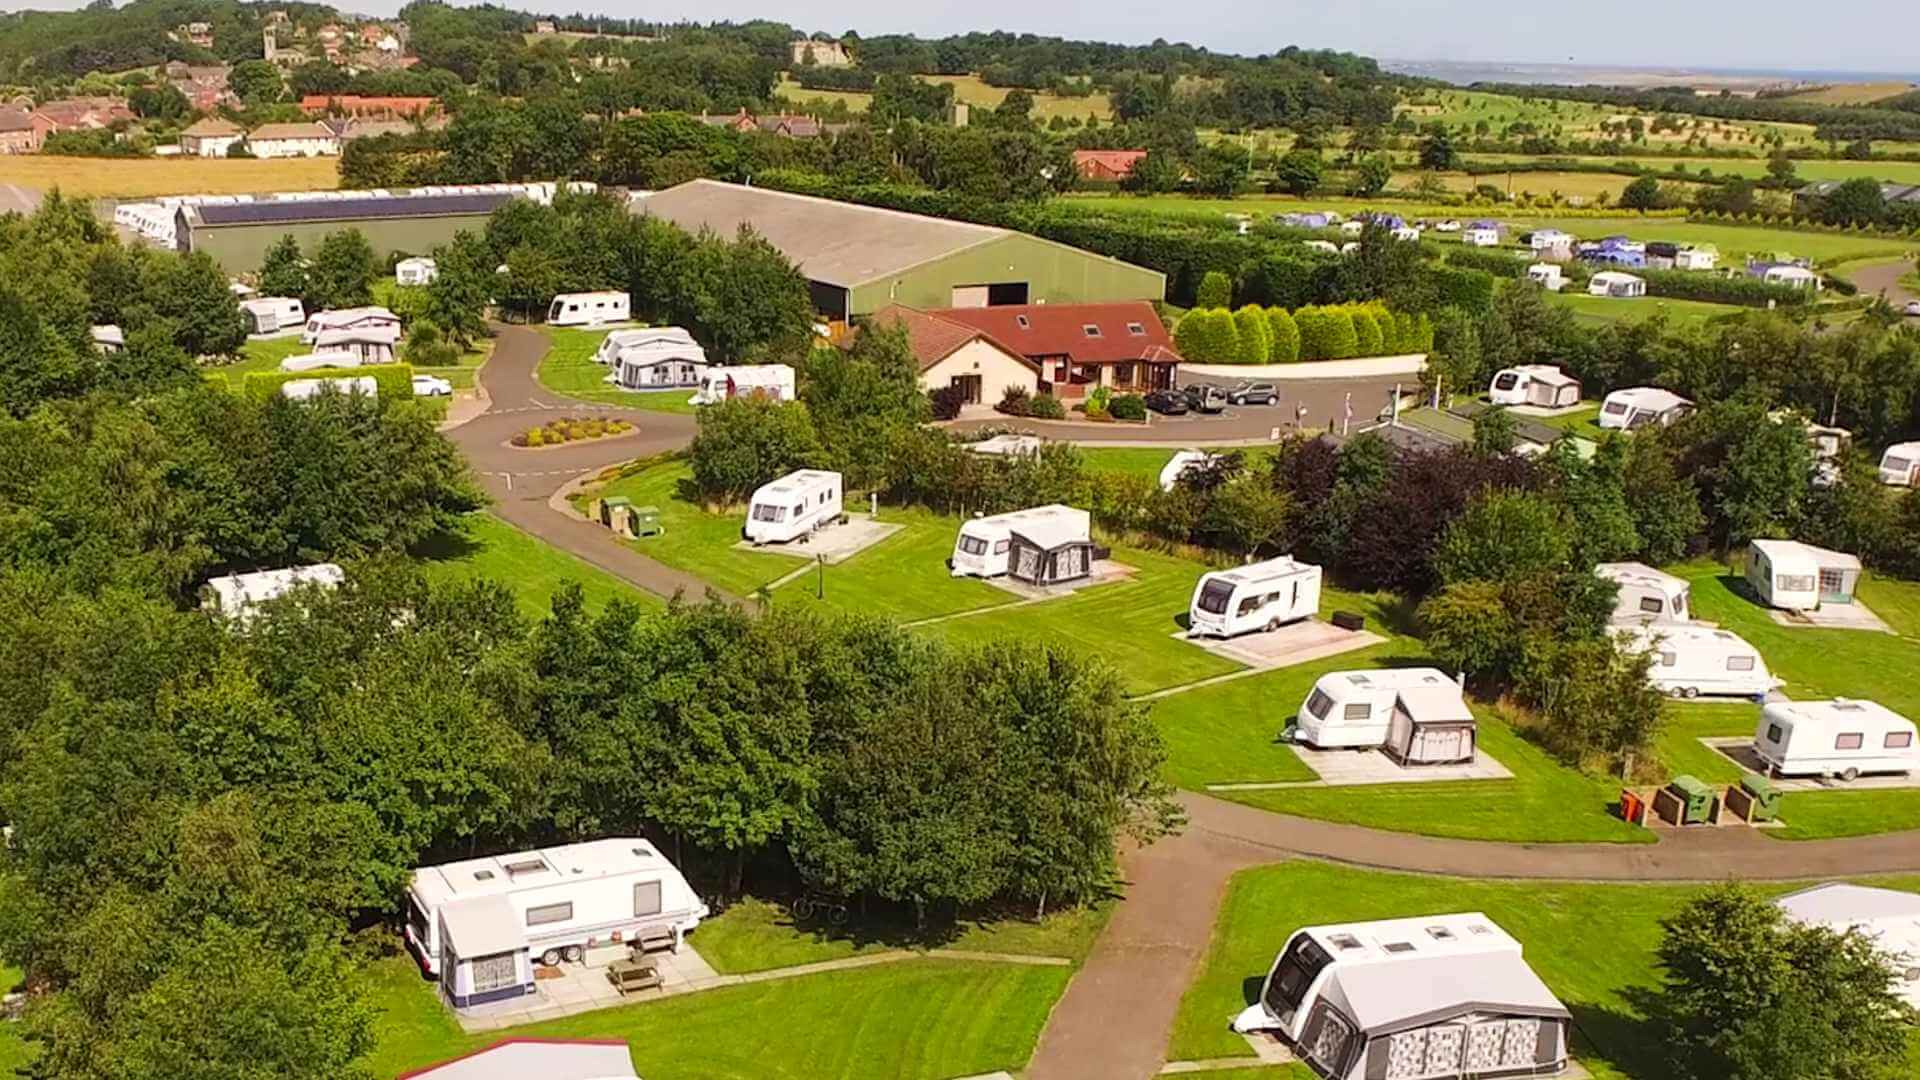 South Meadows Holiday Park